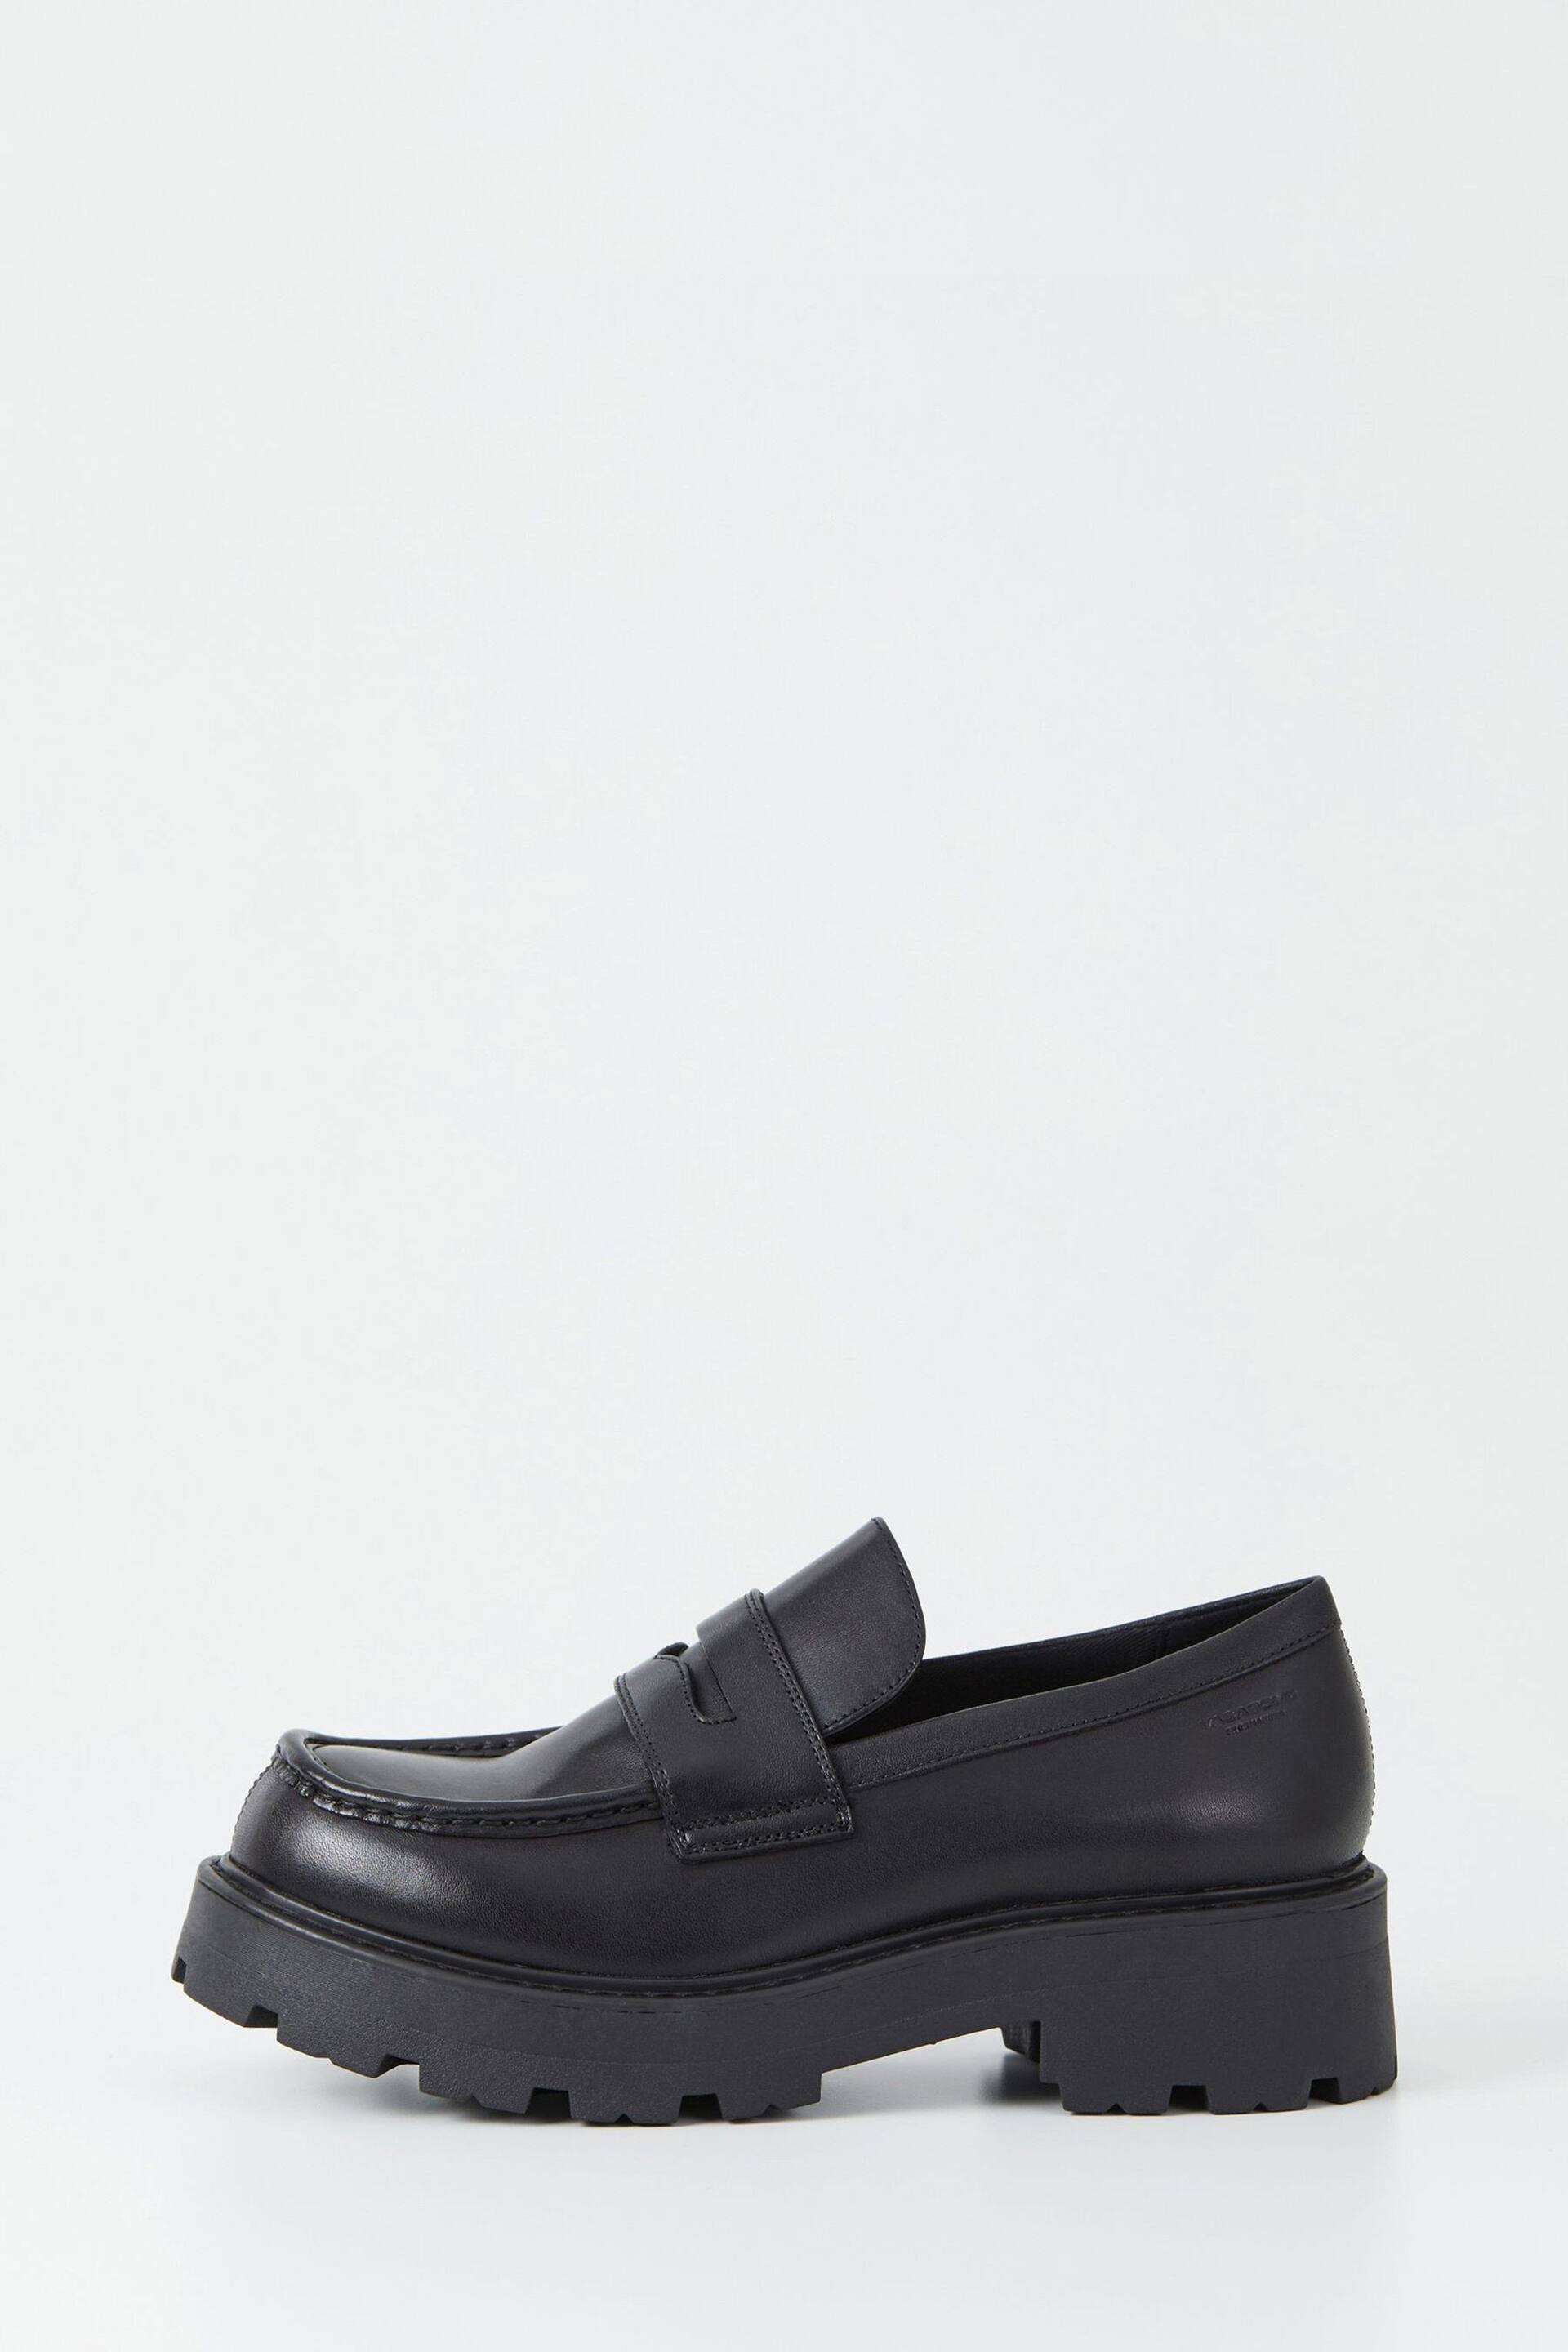 Vagabond Shoemakers Cosmo Penny Black Loafers - Image 1 of 3